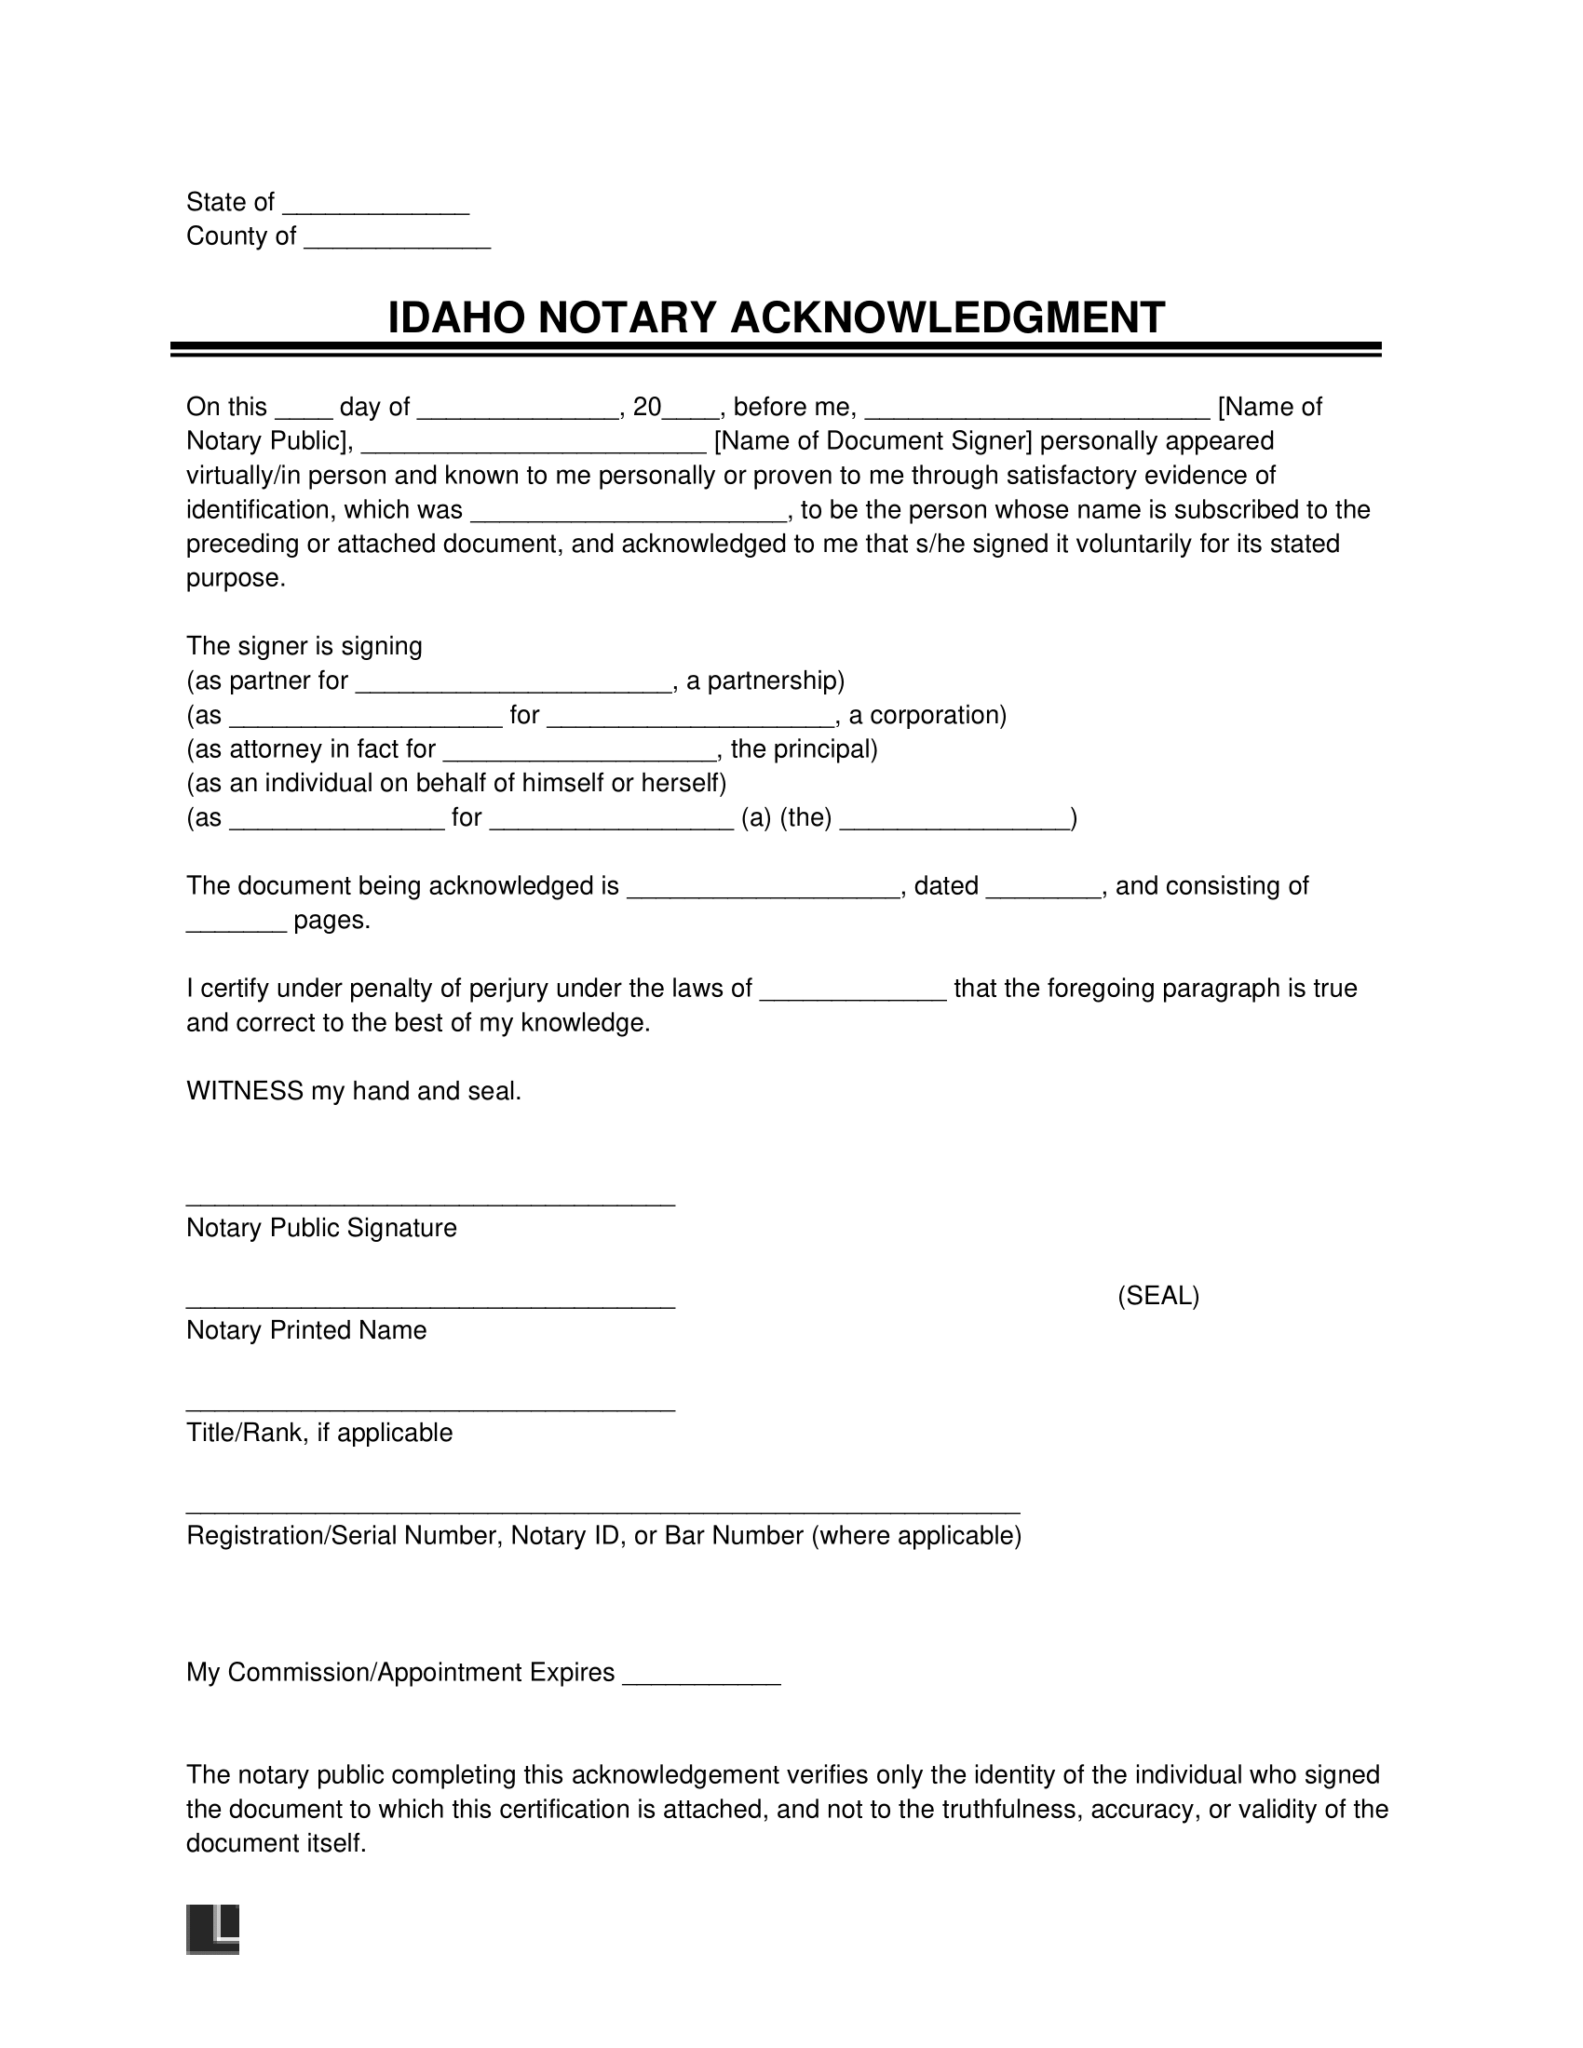 Free Idaho Notary Acknowledgment Form Pdf And Word 3355